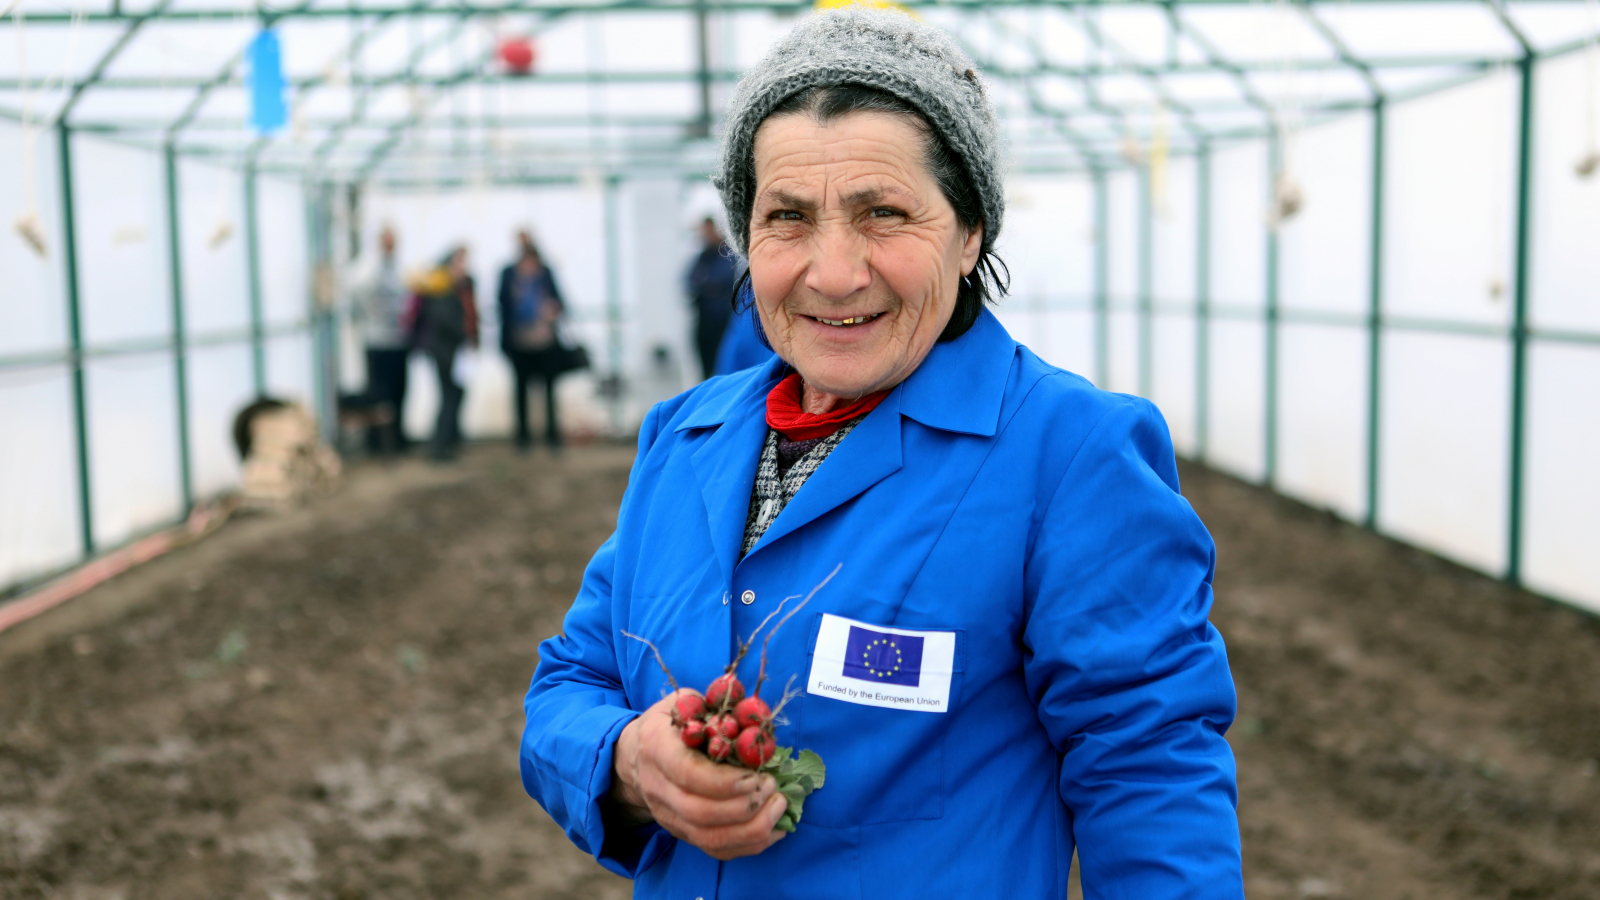 Armenia: New biogas plant and greenhouse opened thanks to the EU 